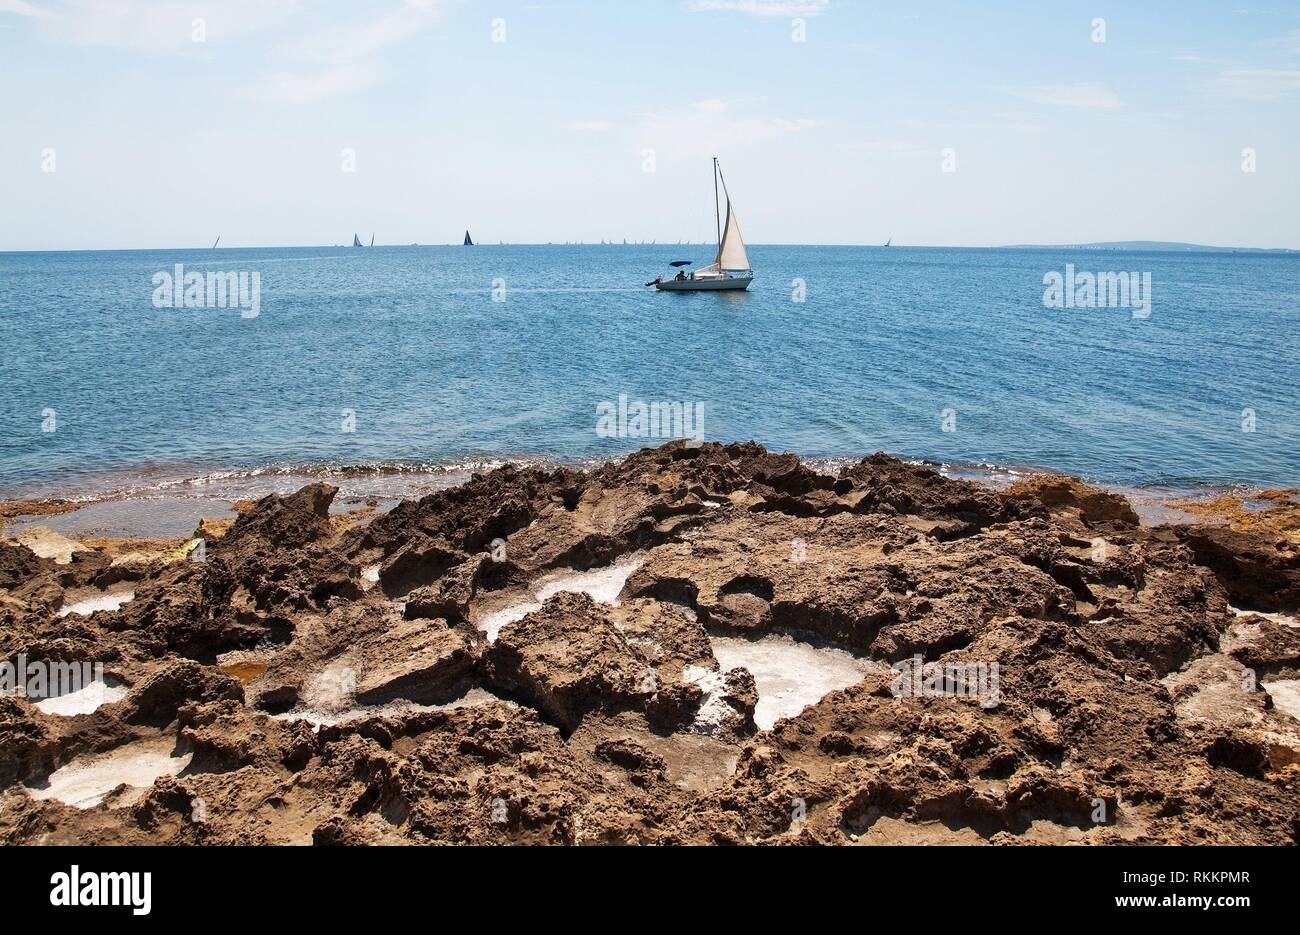 Beautiful natural coast landscape with salt cavities in rocks and sailboat in turquoise blue water in Mallorca, Spain. Stock Photo